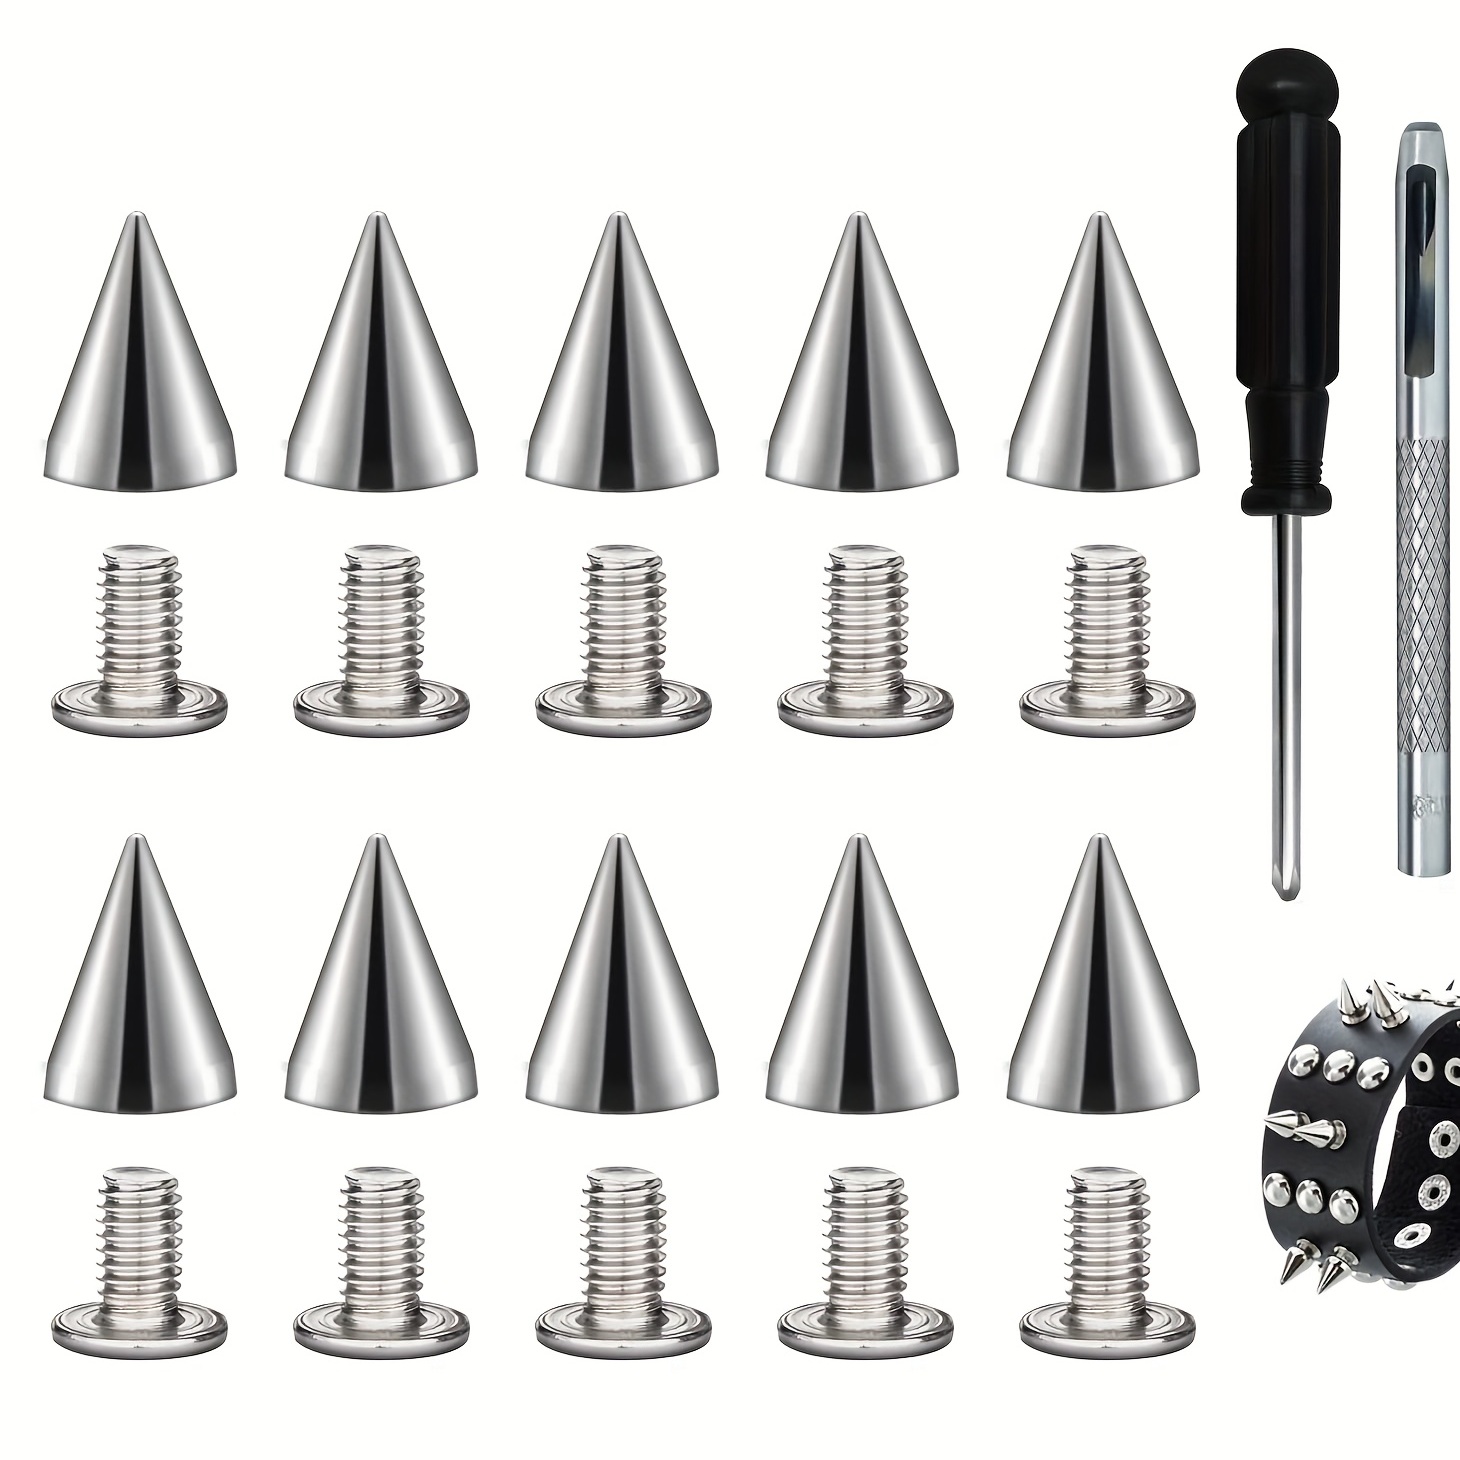 100pcs/set 9.5mm Silver Cone Studs And Spikes DIY Craft Cool Punk Garment  Rivets For Clothes Bag Shoes Leather DIY Handcraft - Price history & Review